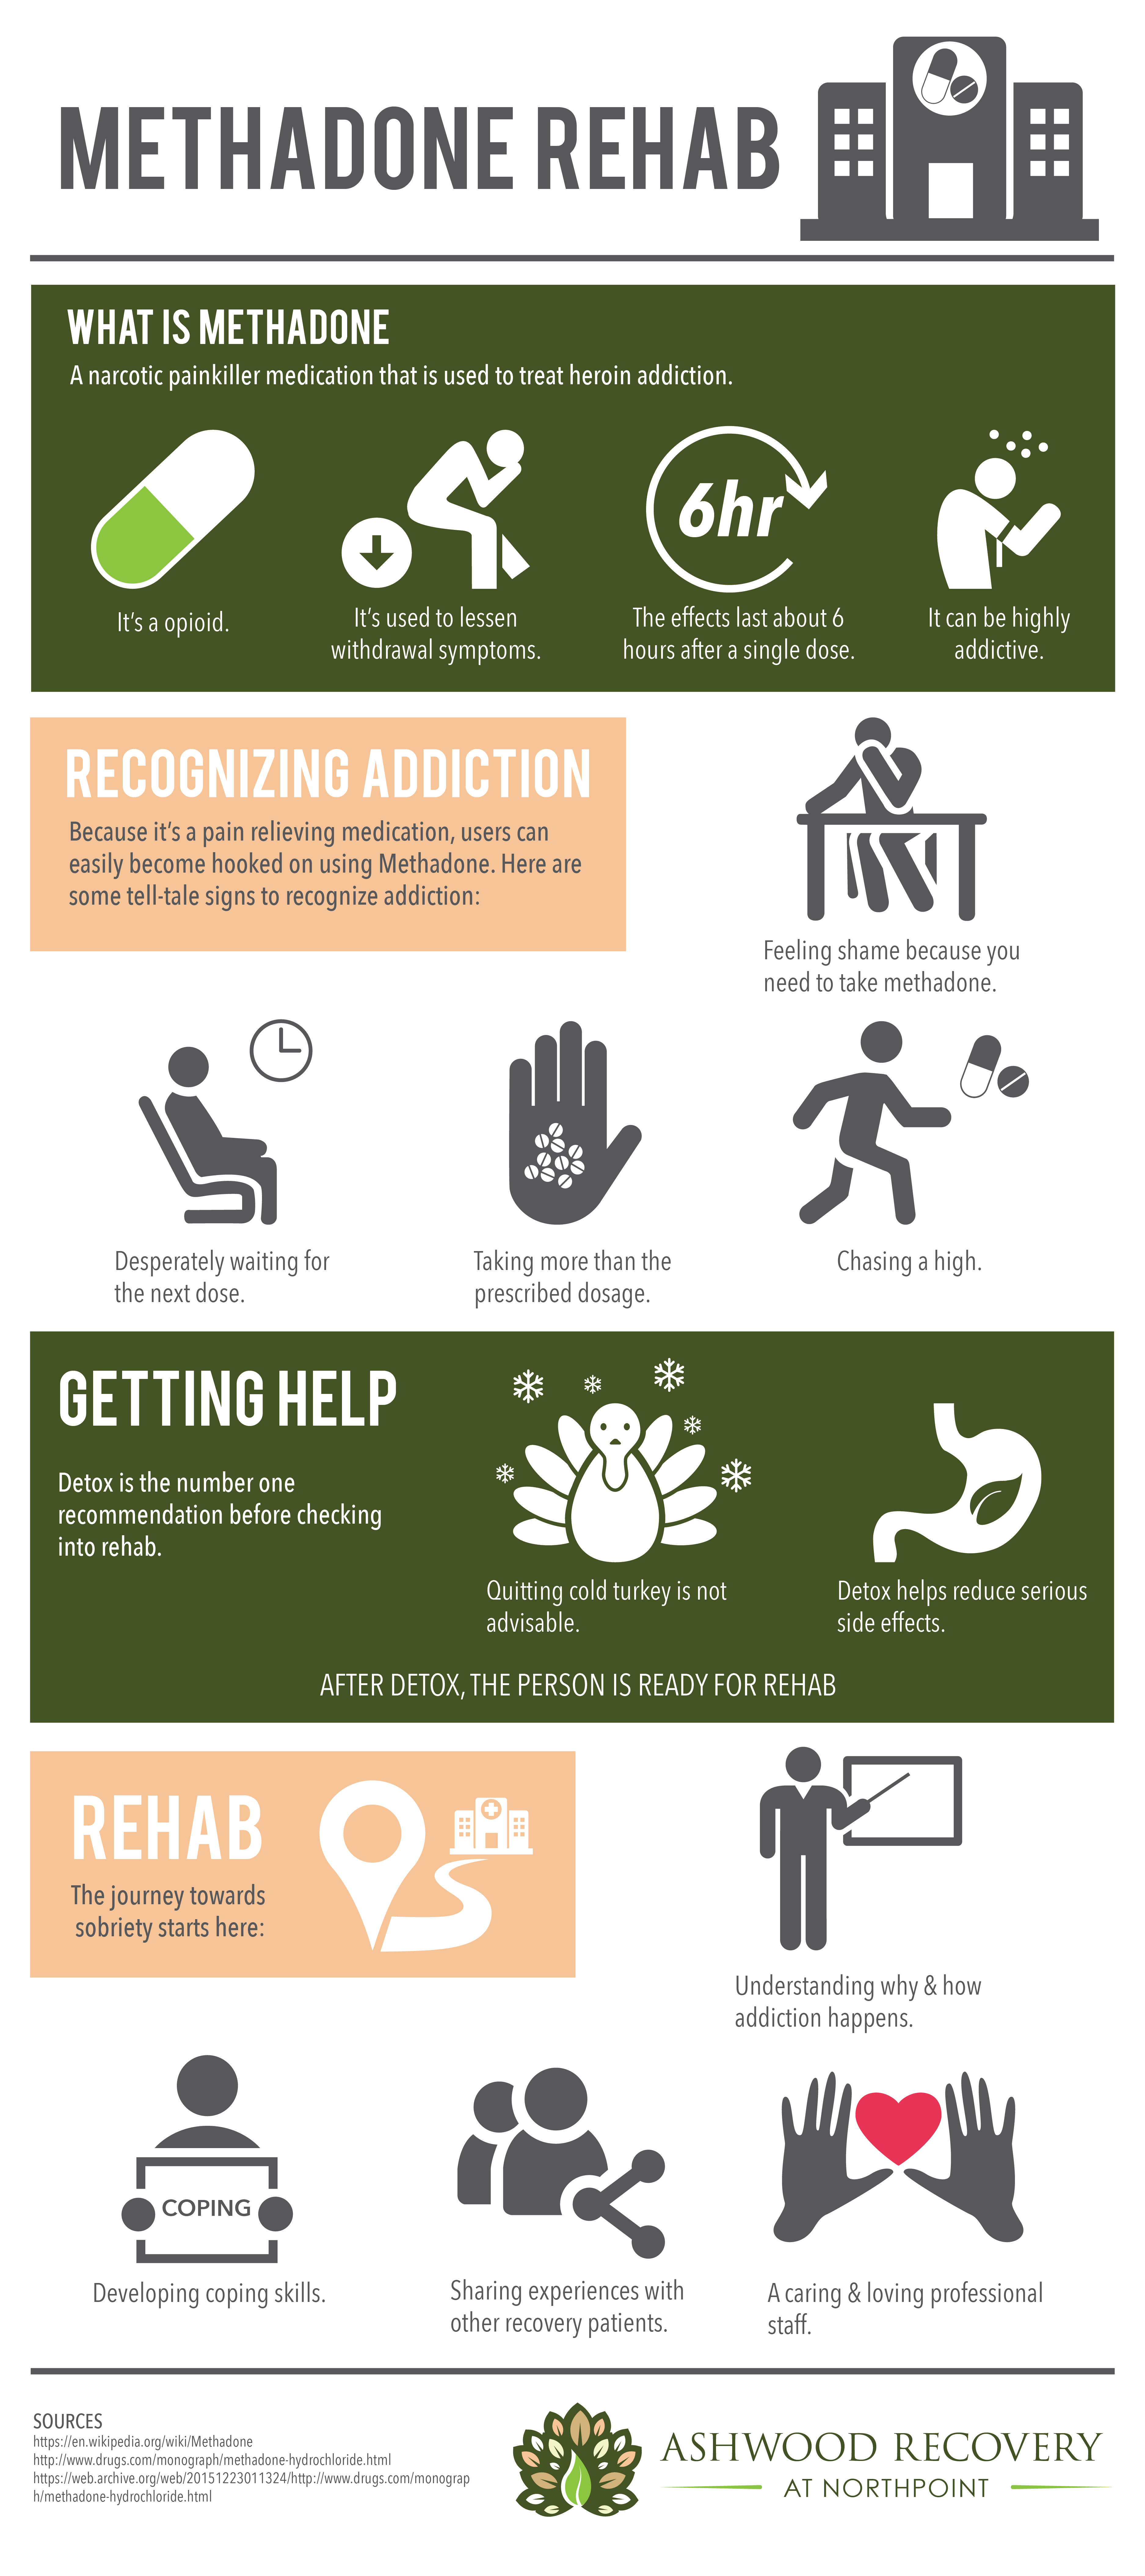 Click here to see information about methadone rehab in Boise, Idaho